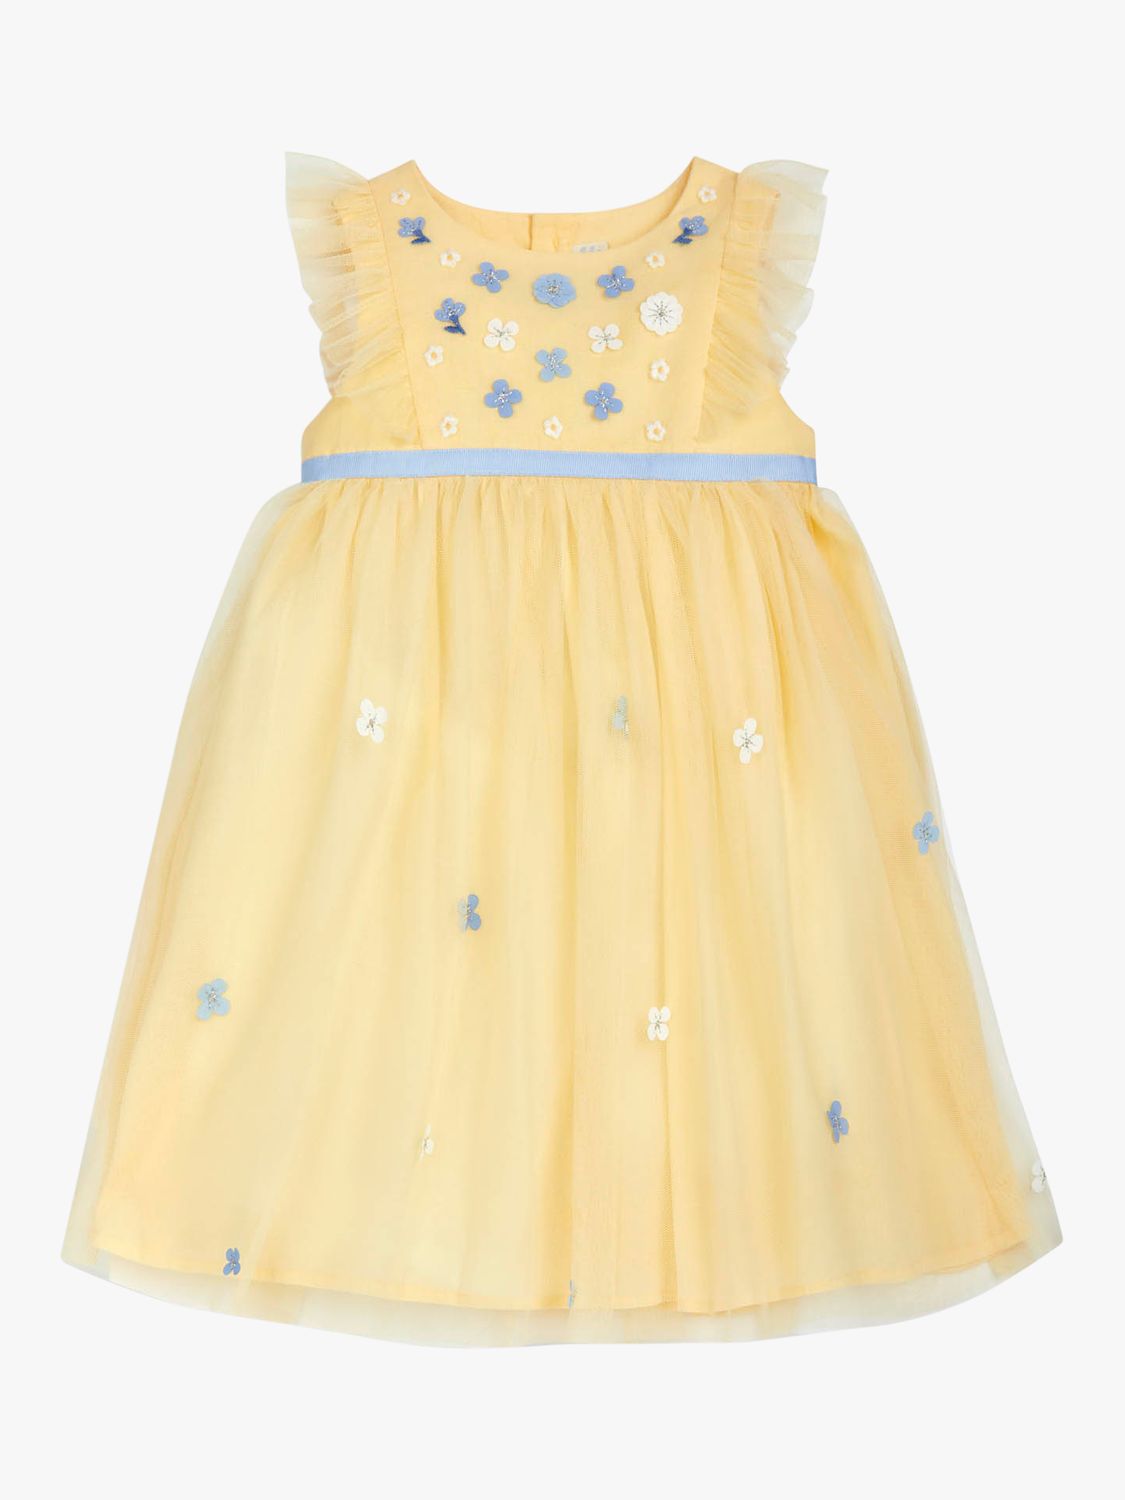 JoJo Maman Bébé Baby Floral Tulle Party Dress, Yellow, 2-3 years